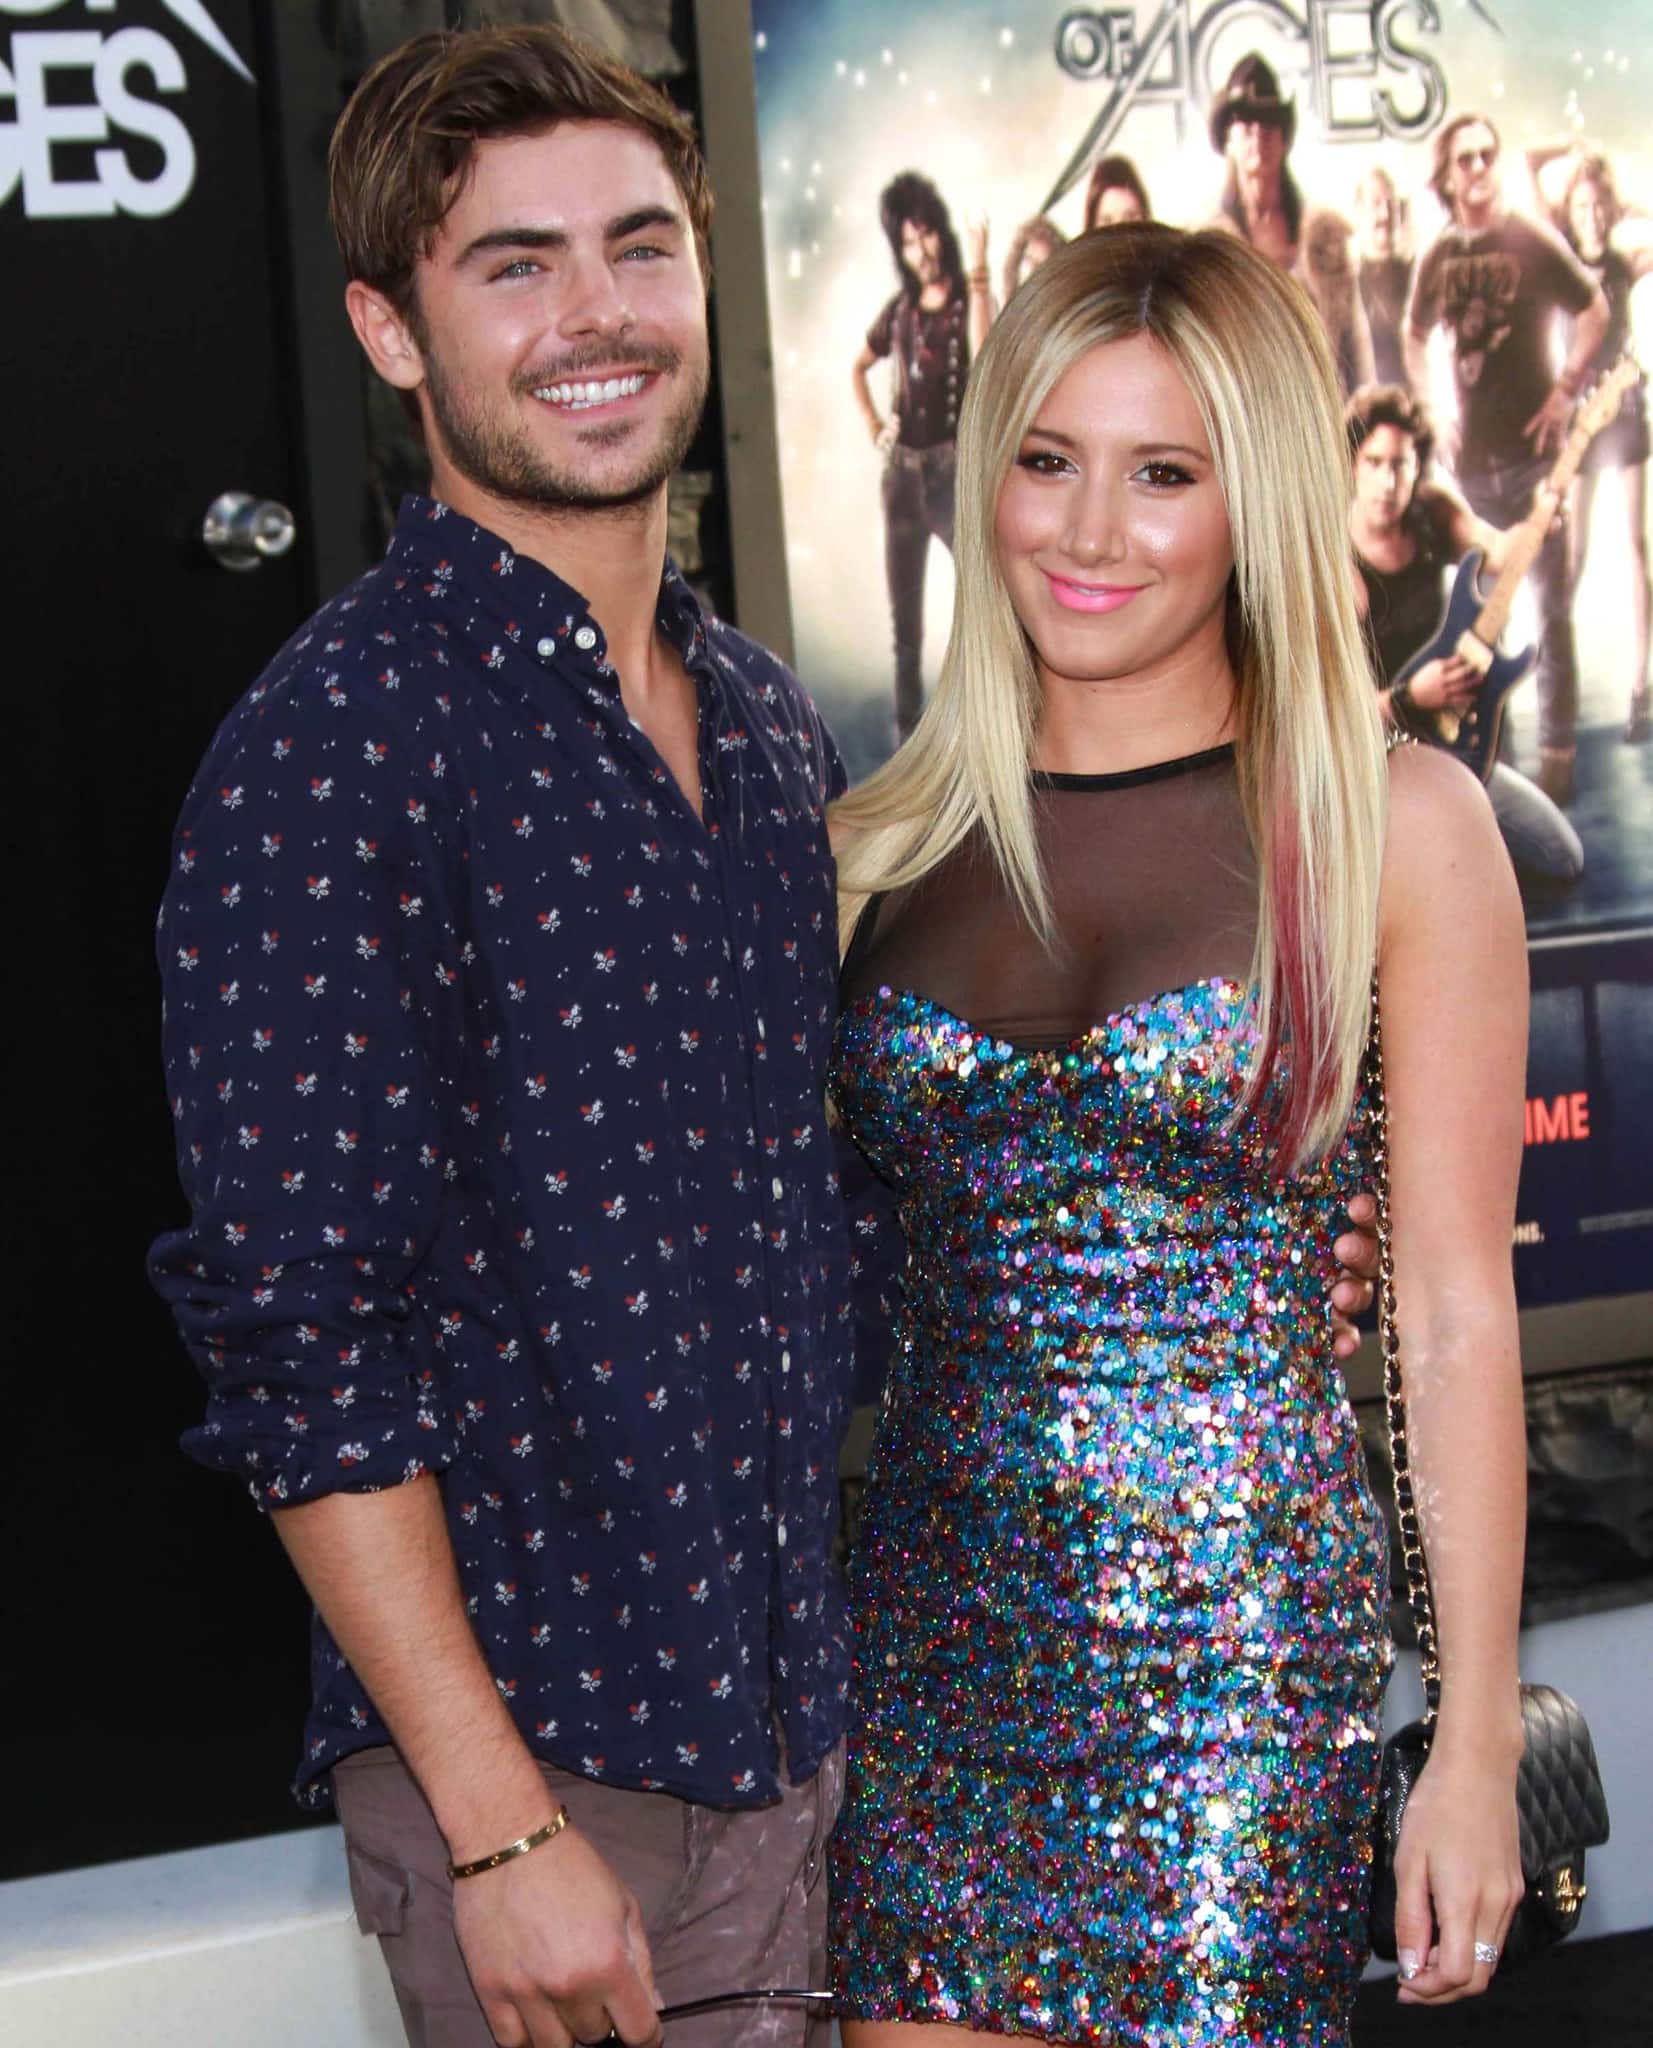 Ashley Tisdale said co-star Zac Efron used too much tongue during their on-screen kiss